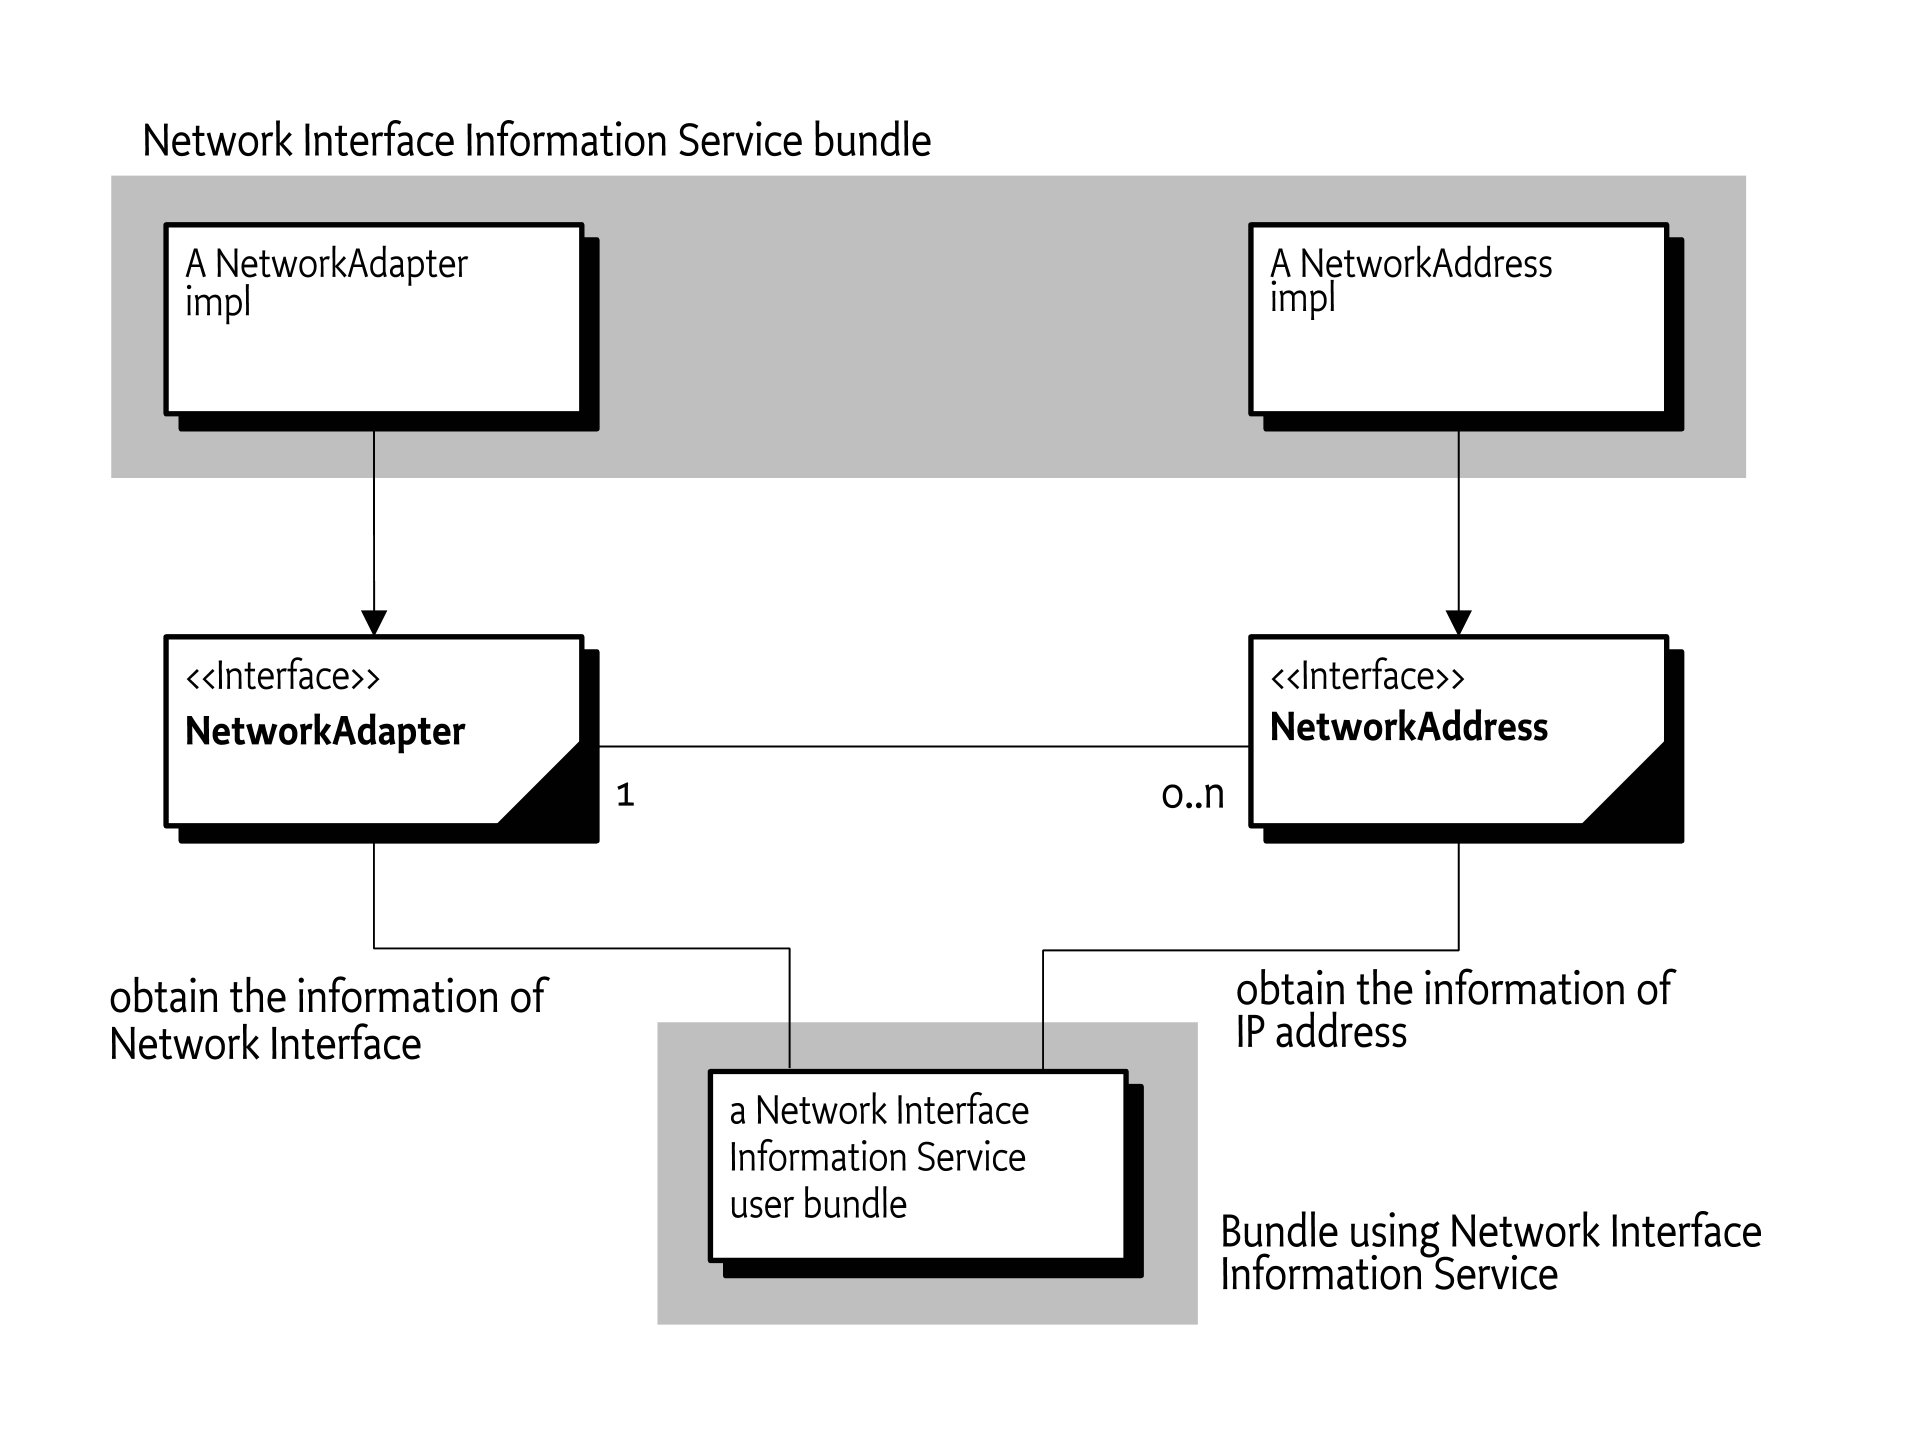 Network Interface Information Service Overview Diagram